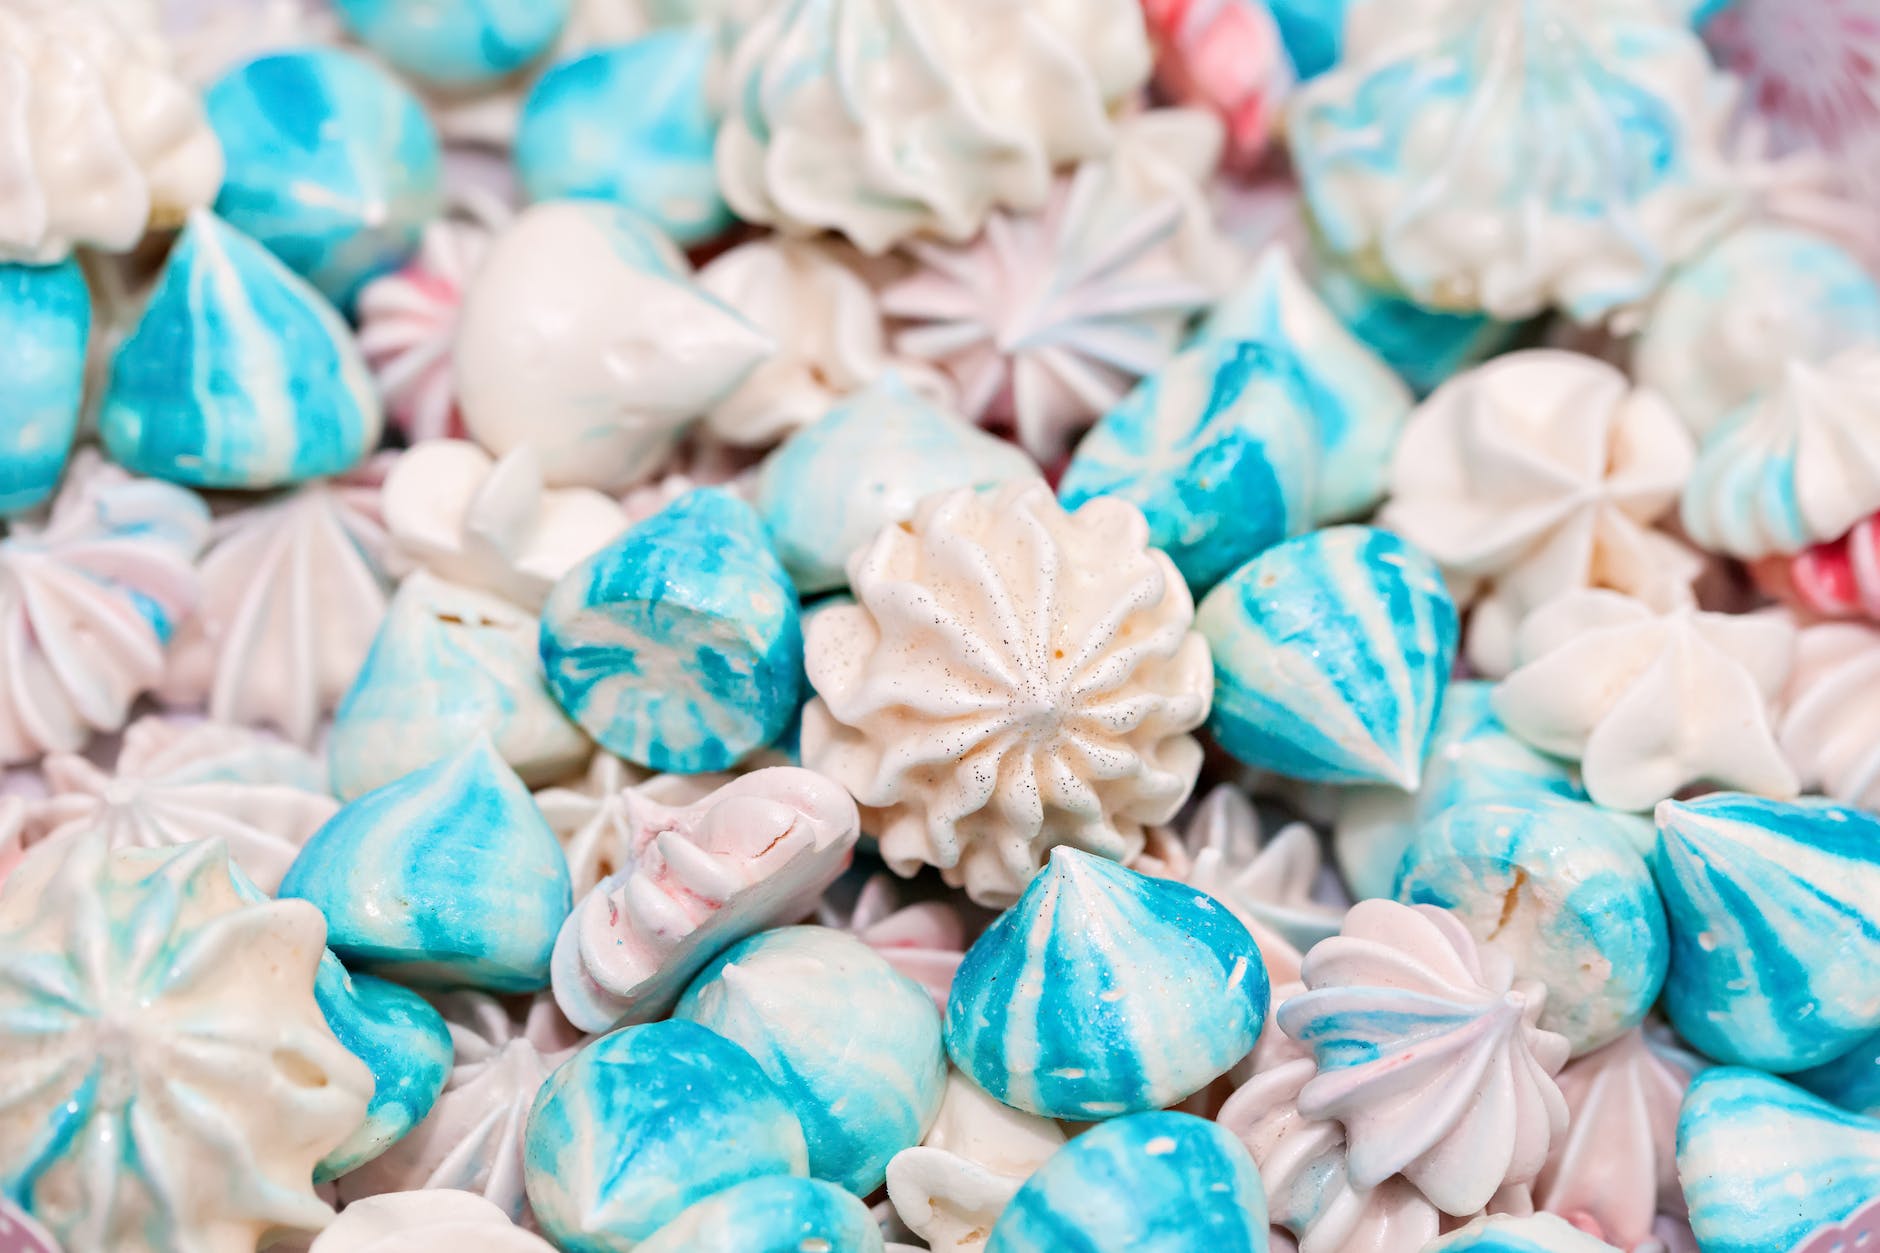 white and blue meringue in close up photography